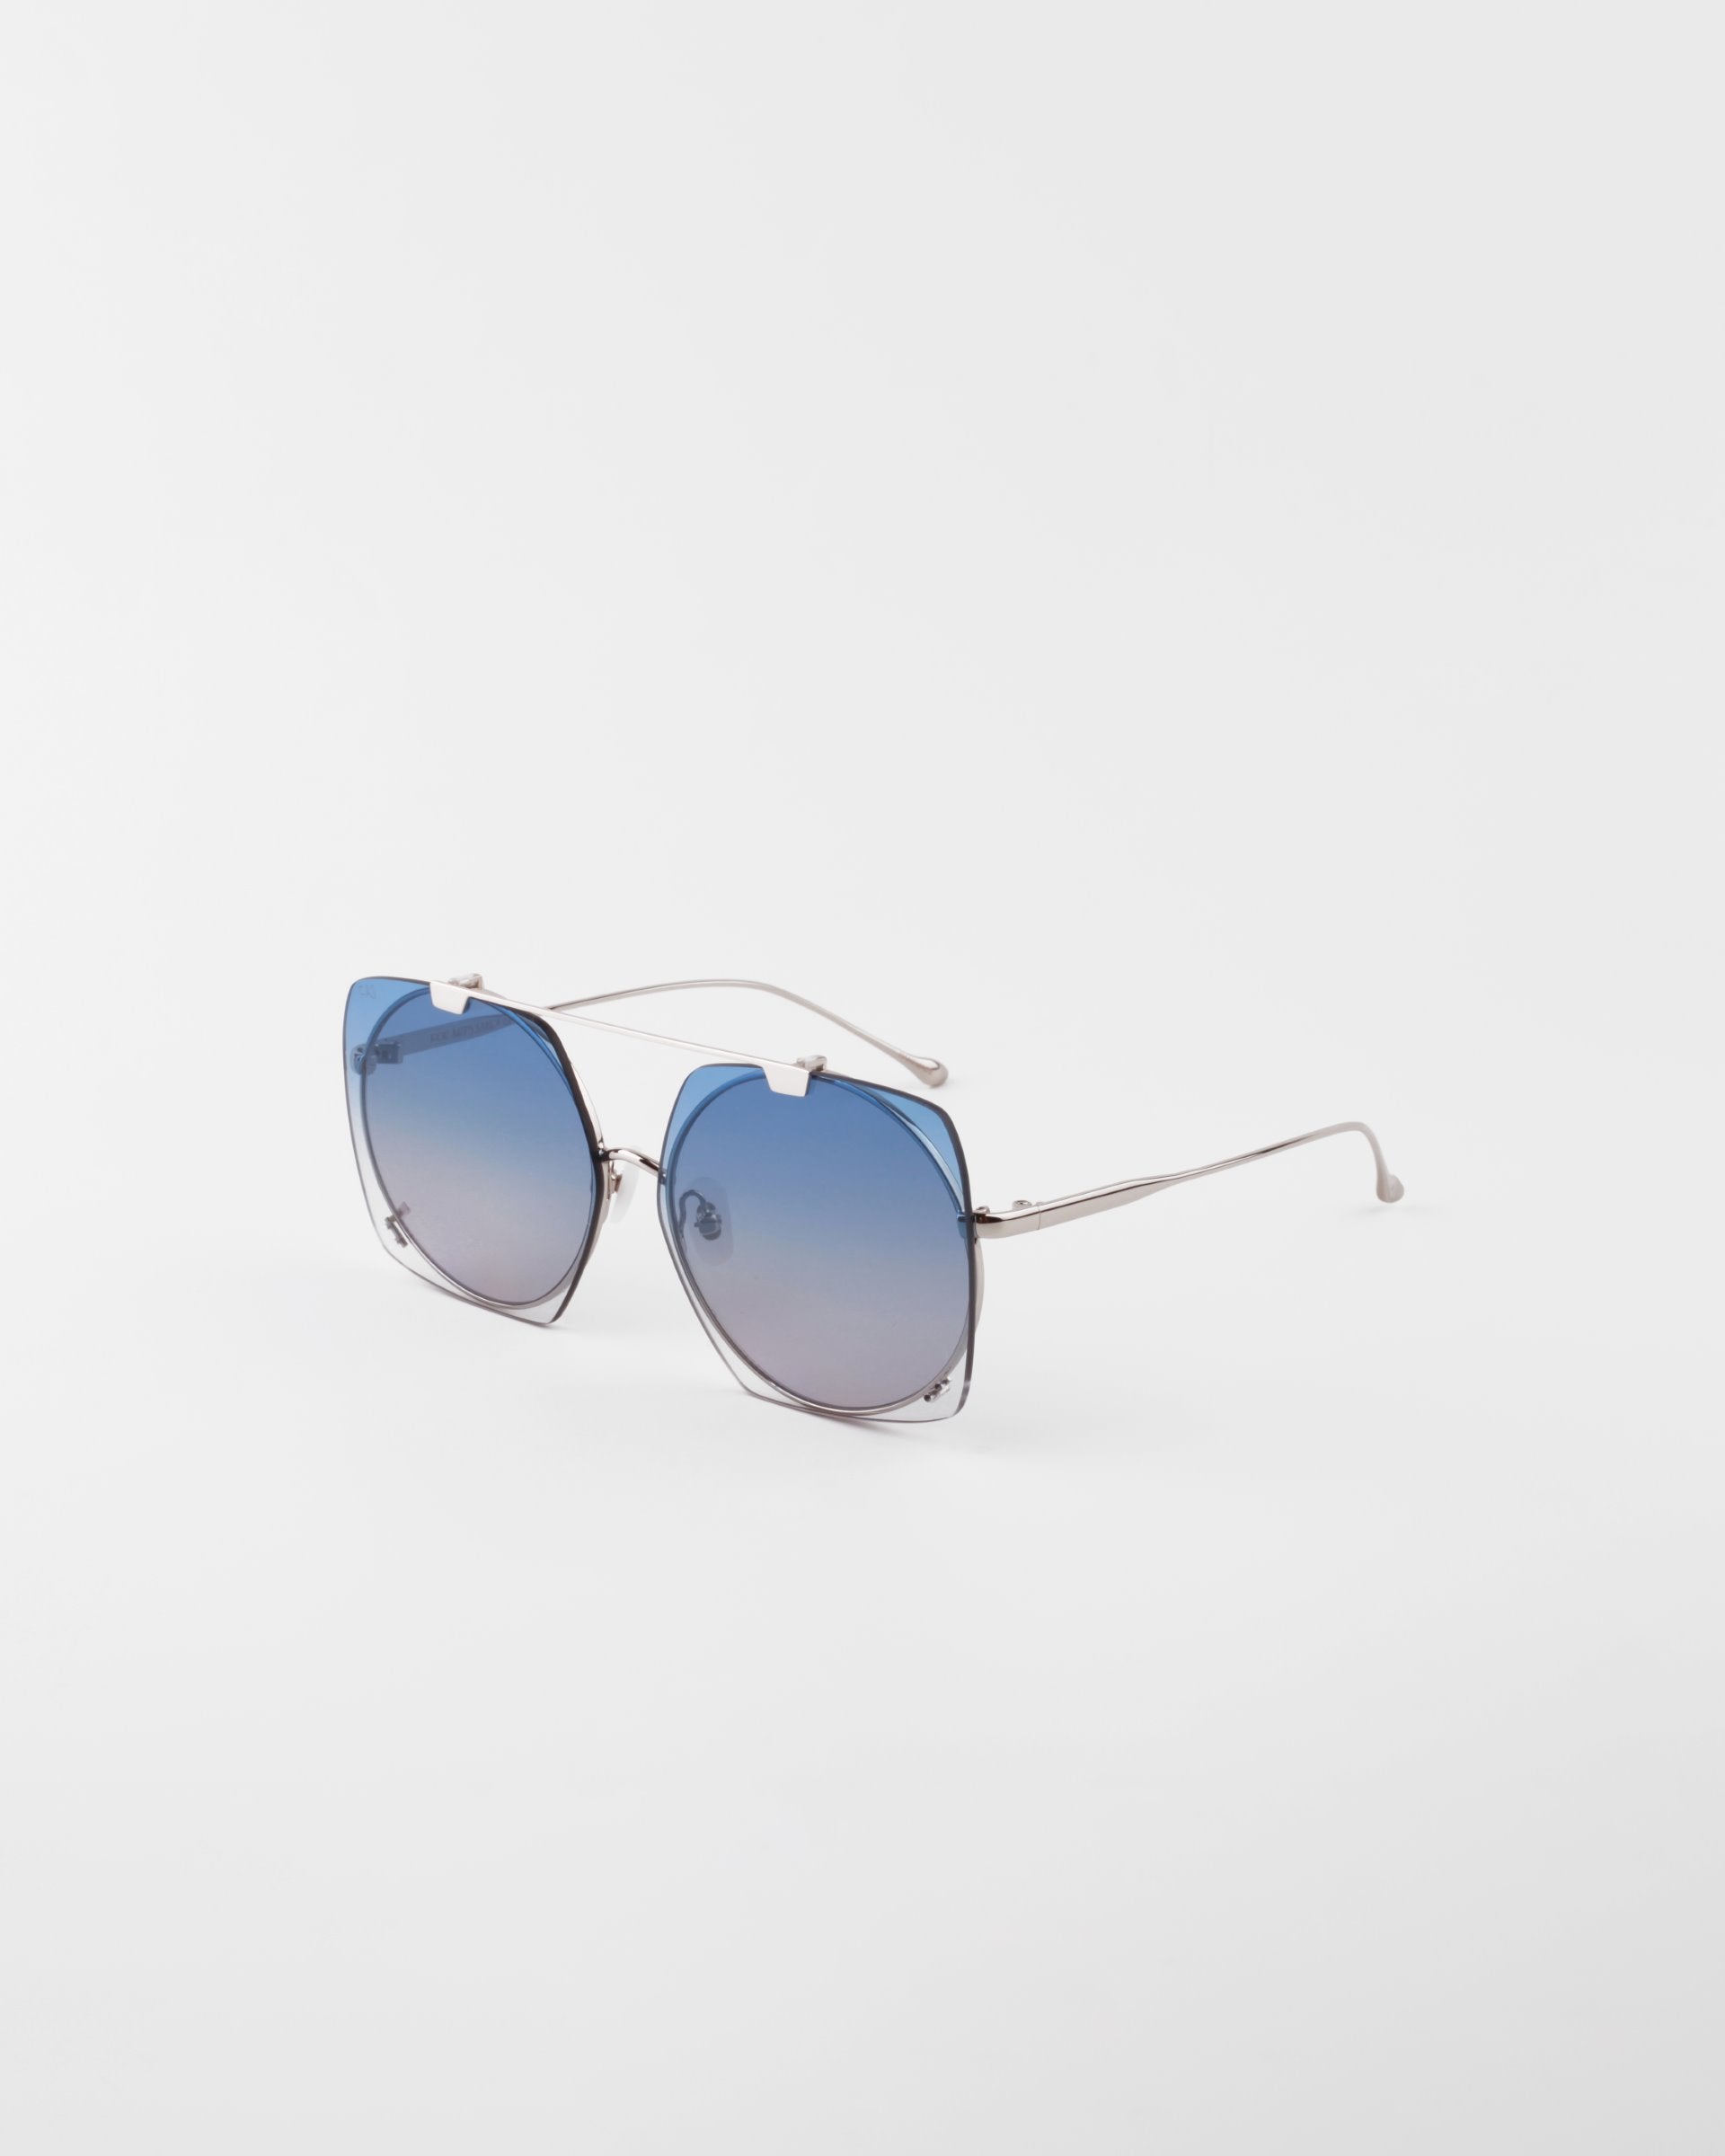 A pair of stylish, oversized Last Summer sunglasses by For Art's Sake® with blue gradient lenses and thin, 18-karat gold-plated metallic arms positioned on a white background.